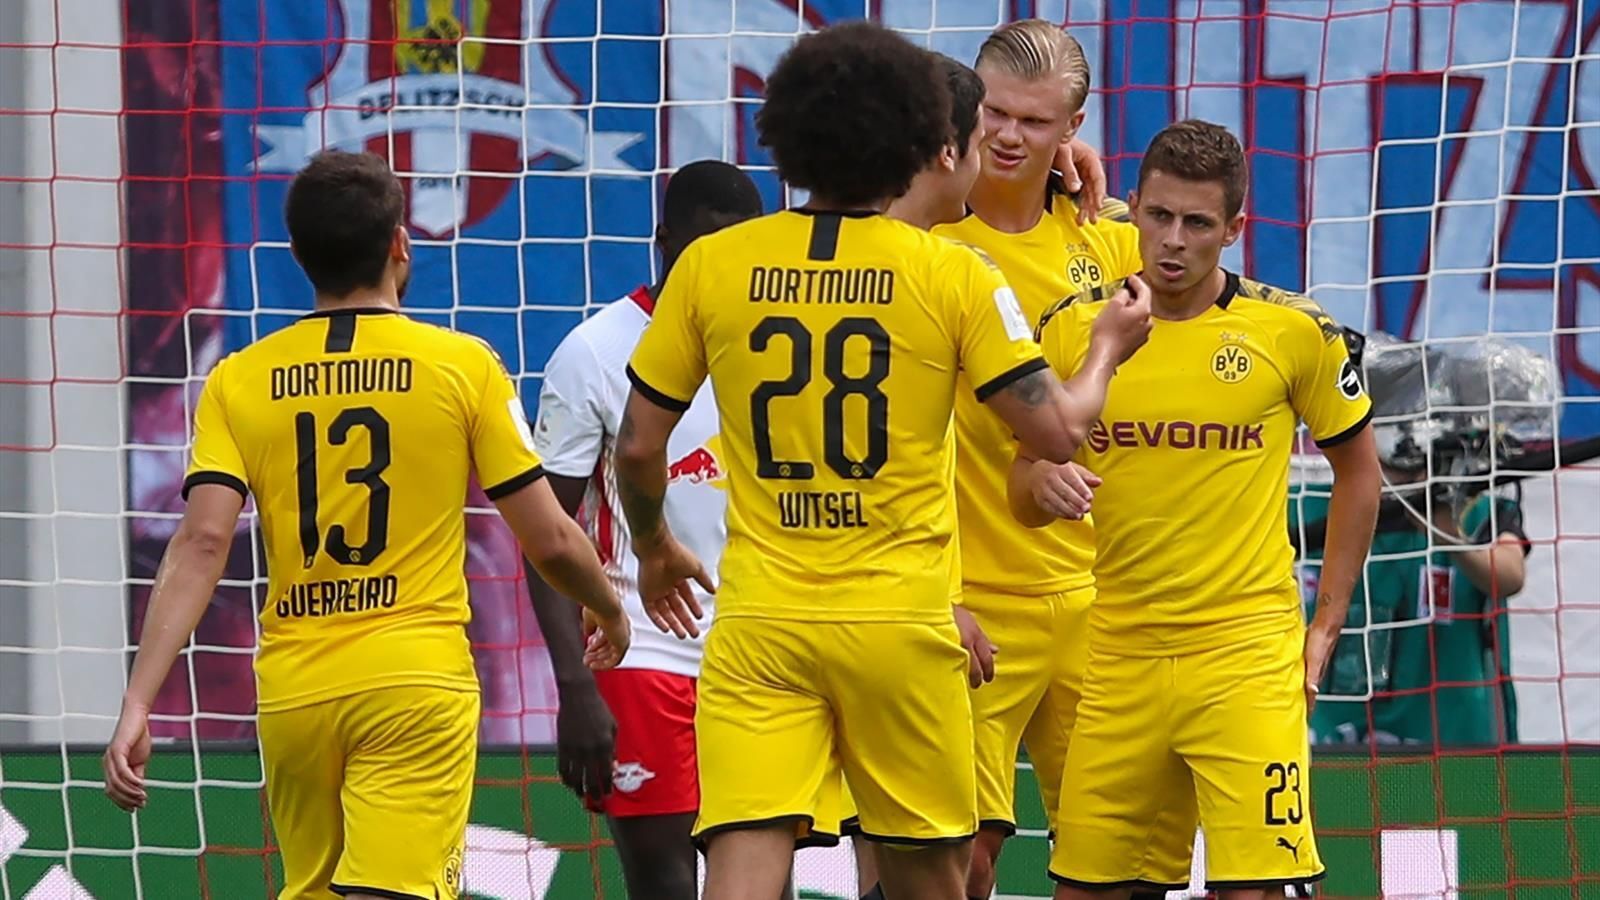 Erling Haaland scored his 13th goal to secure Borussia Dortmund's second place  